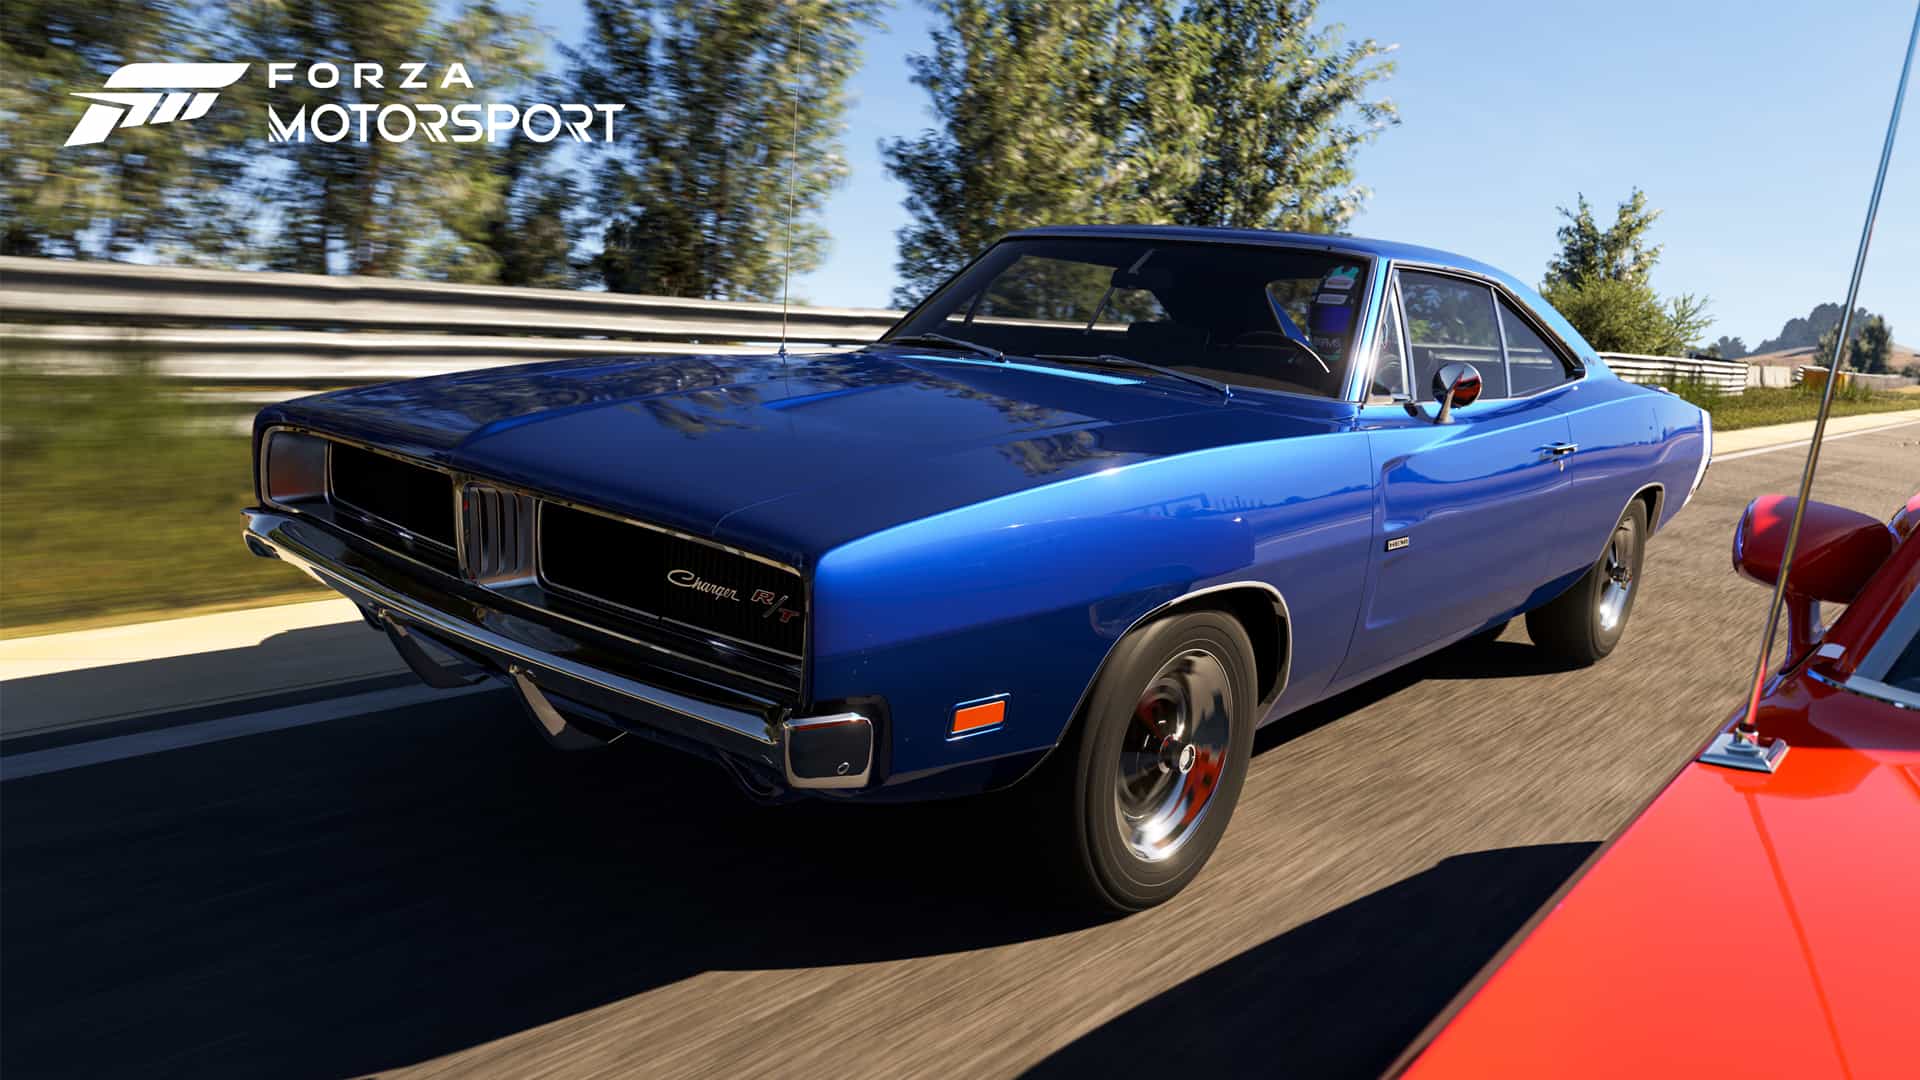 The new Forza Motorsport will release Spring 2023 02